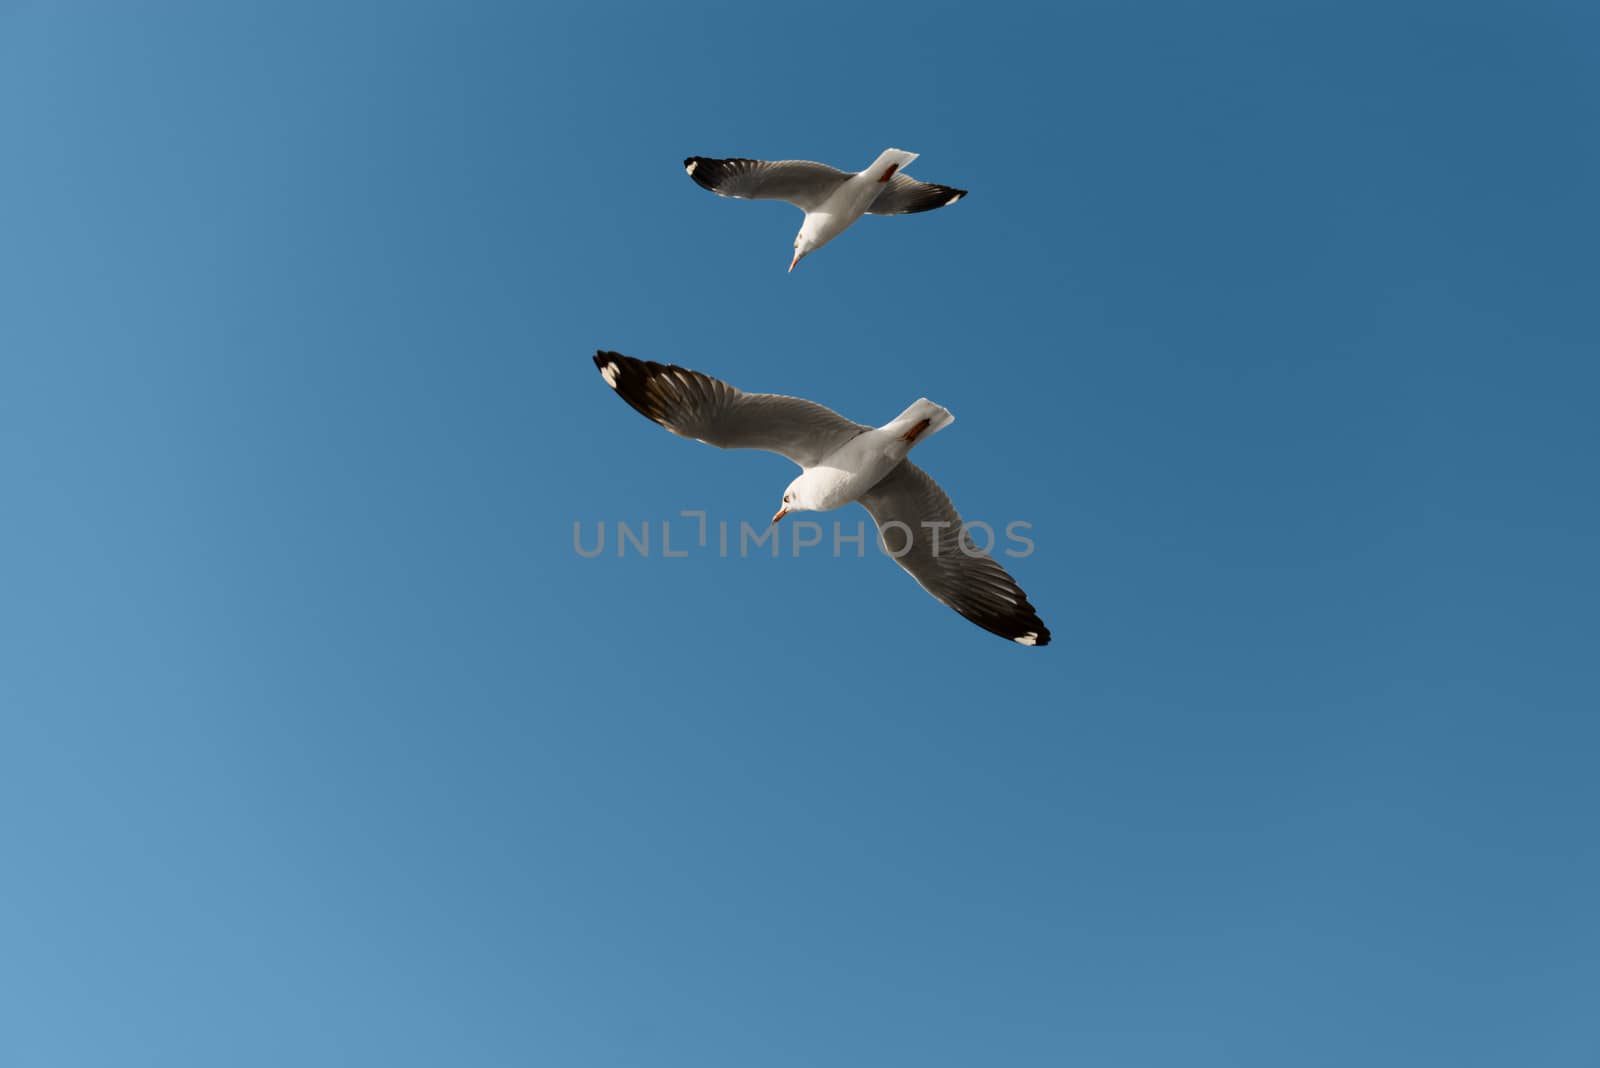 Two white seagulls fly in the bright blue sky 